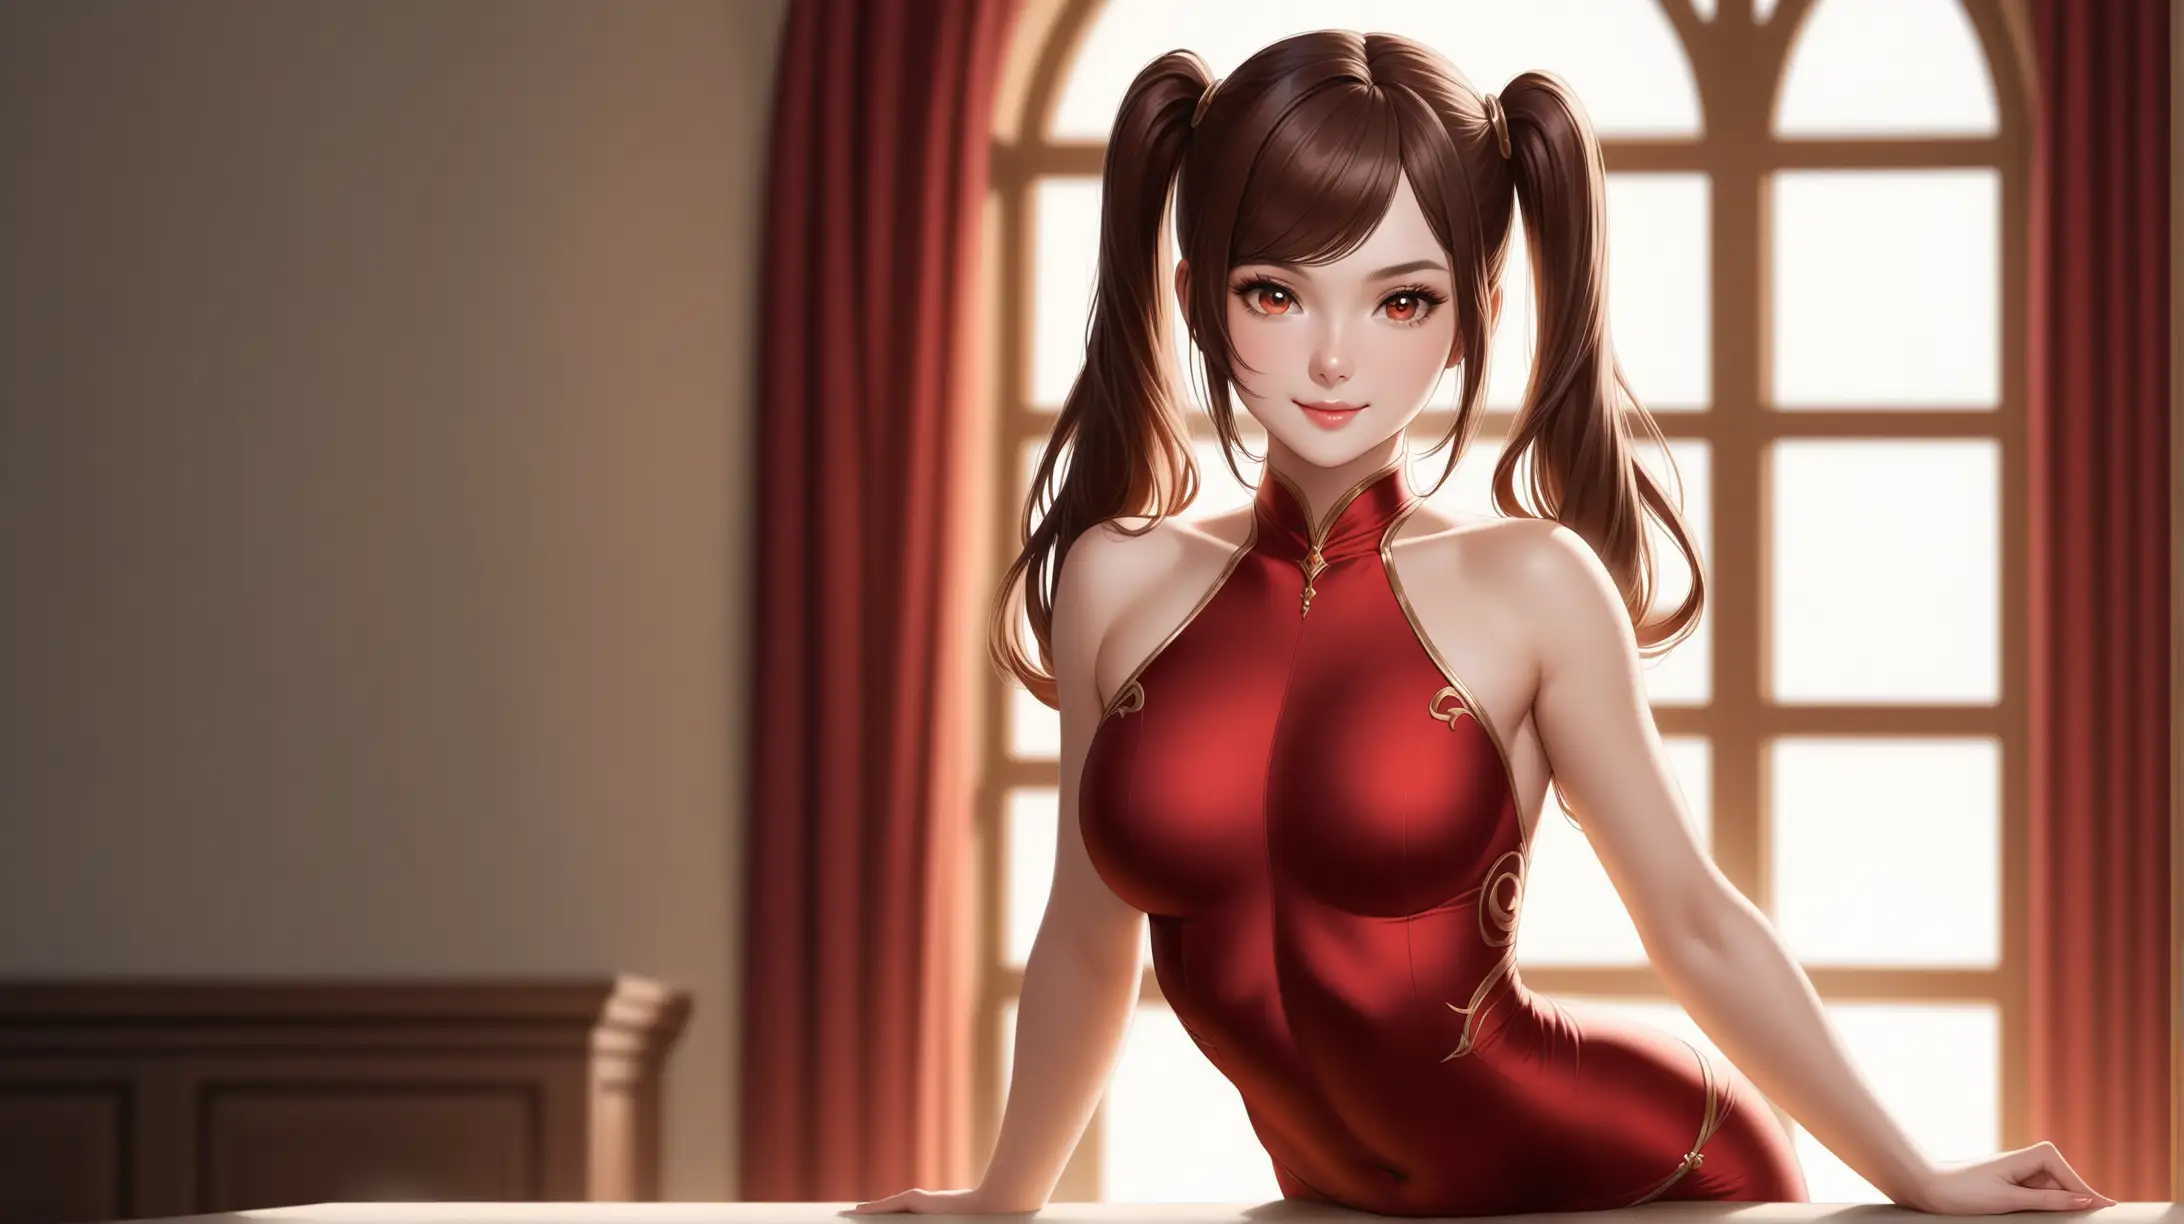 Seductive Woman with Long ReddishBrown Hair in Genshin Impact Inspired Outfit